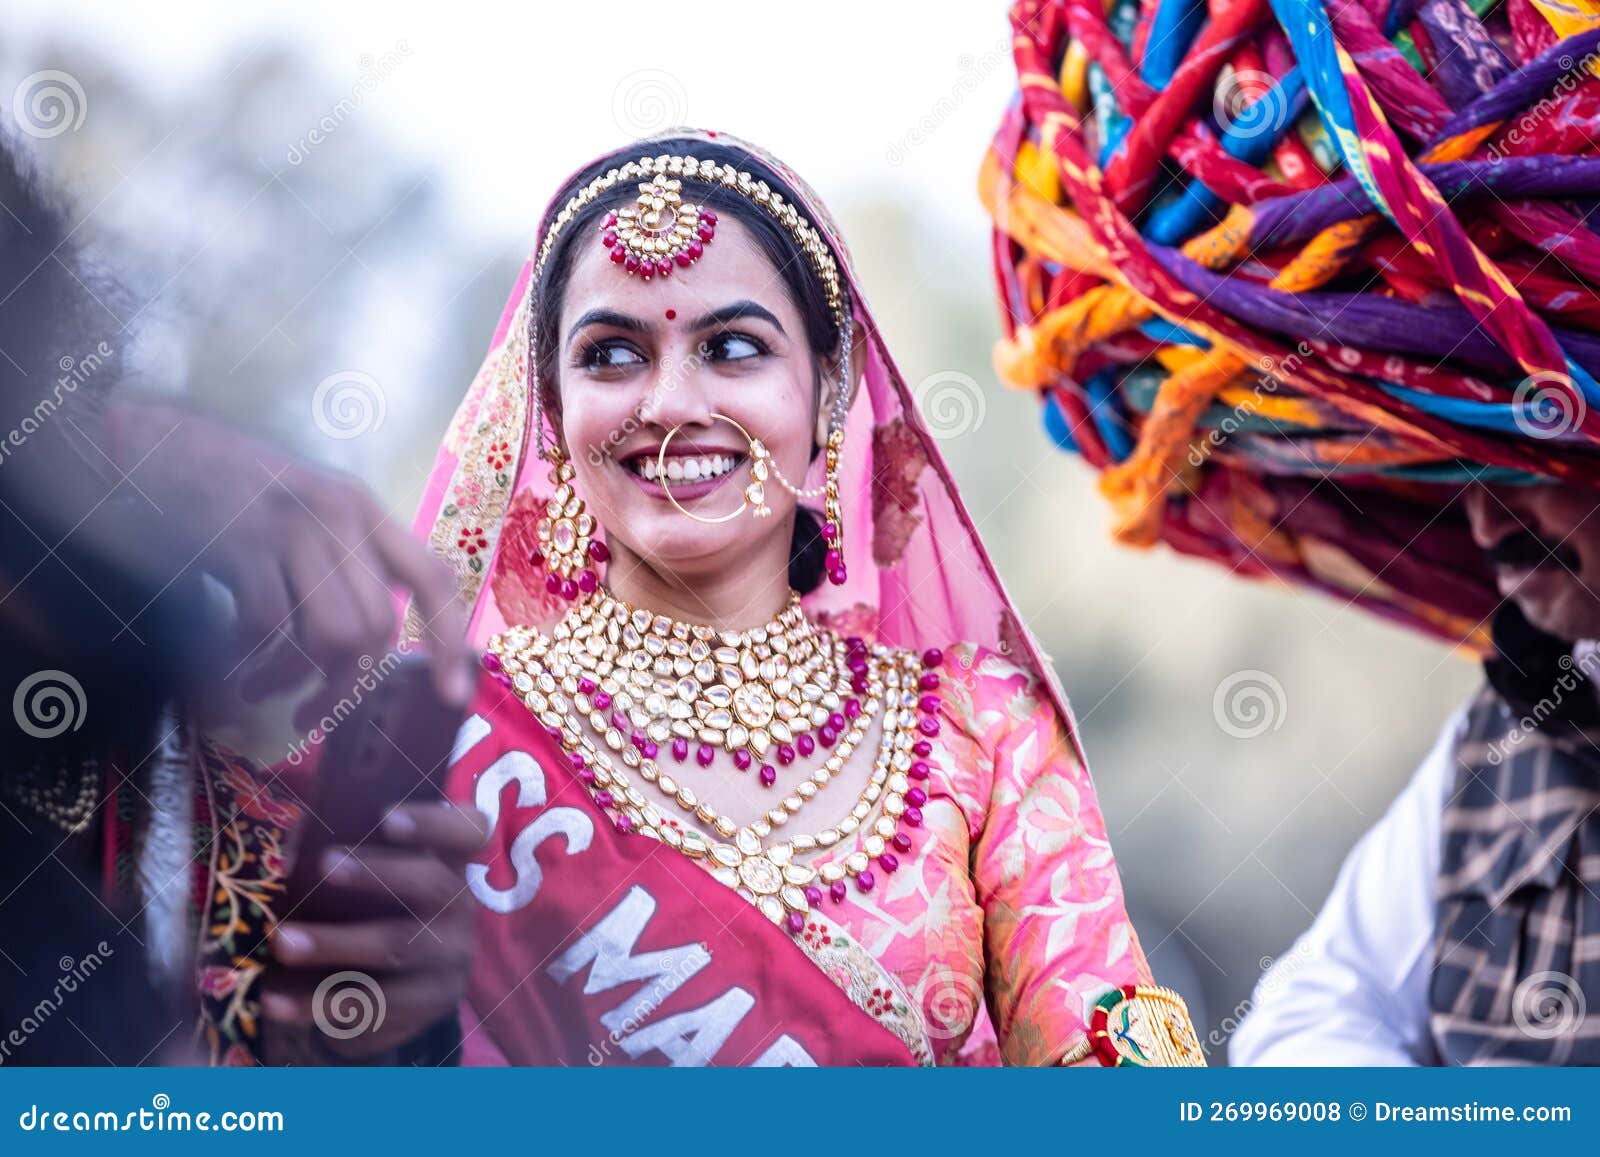 portrait woman rajasthan traditional rajasthani clothes bikaner india january camel festival young beautiful 269969008